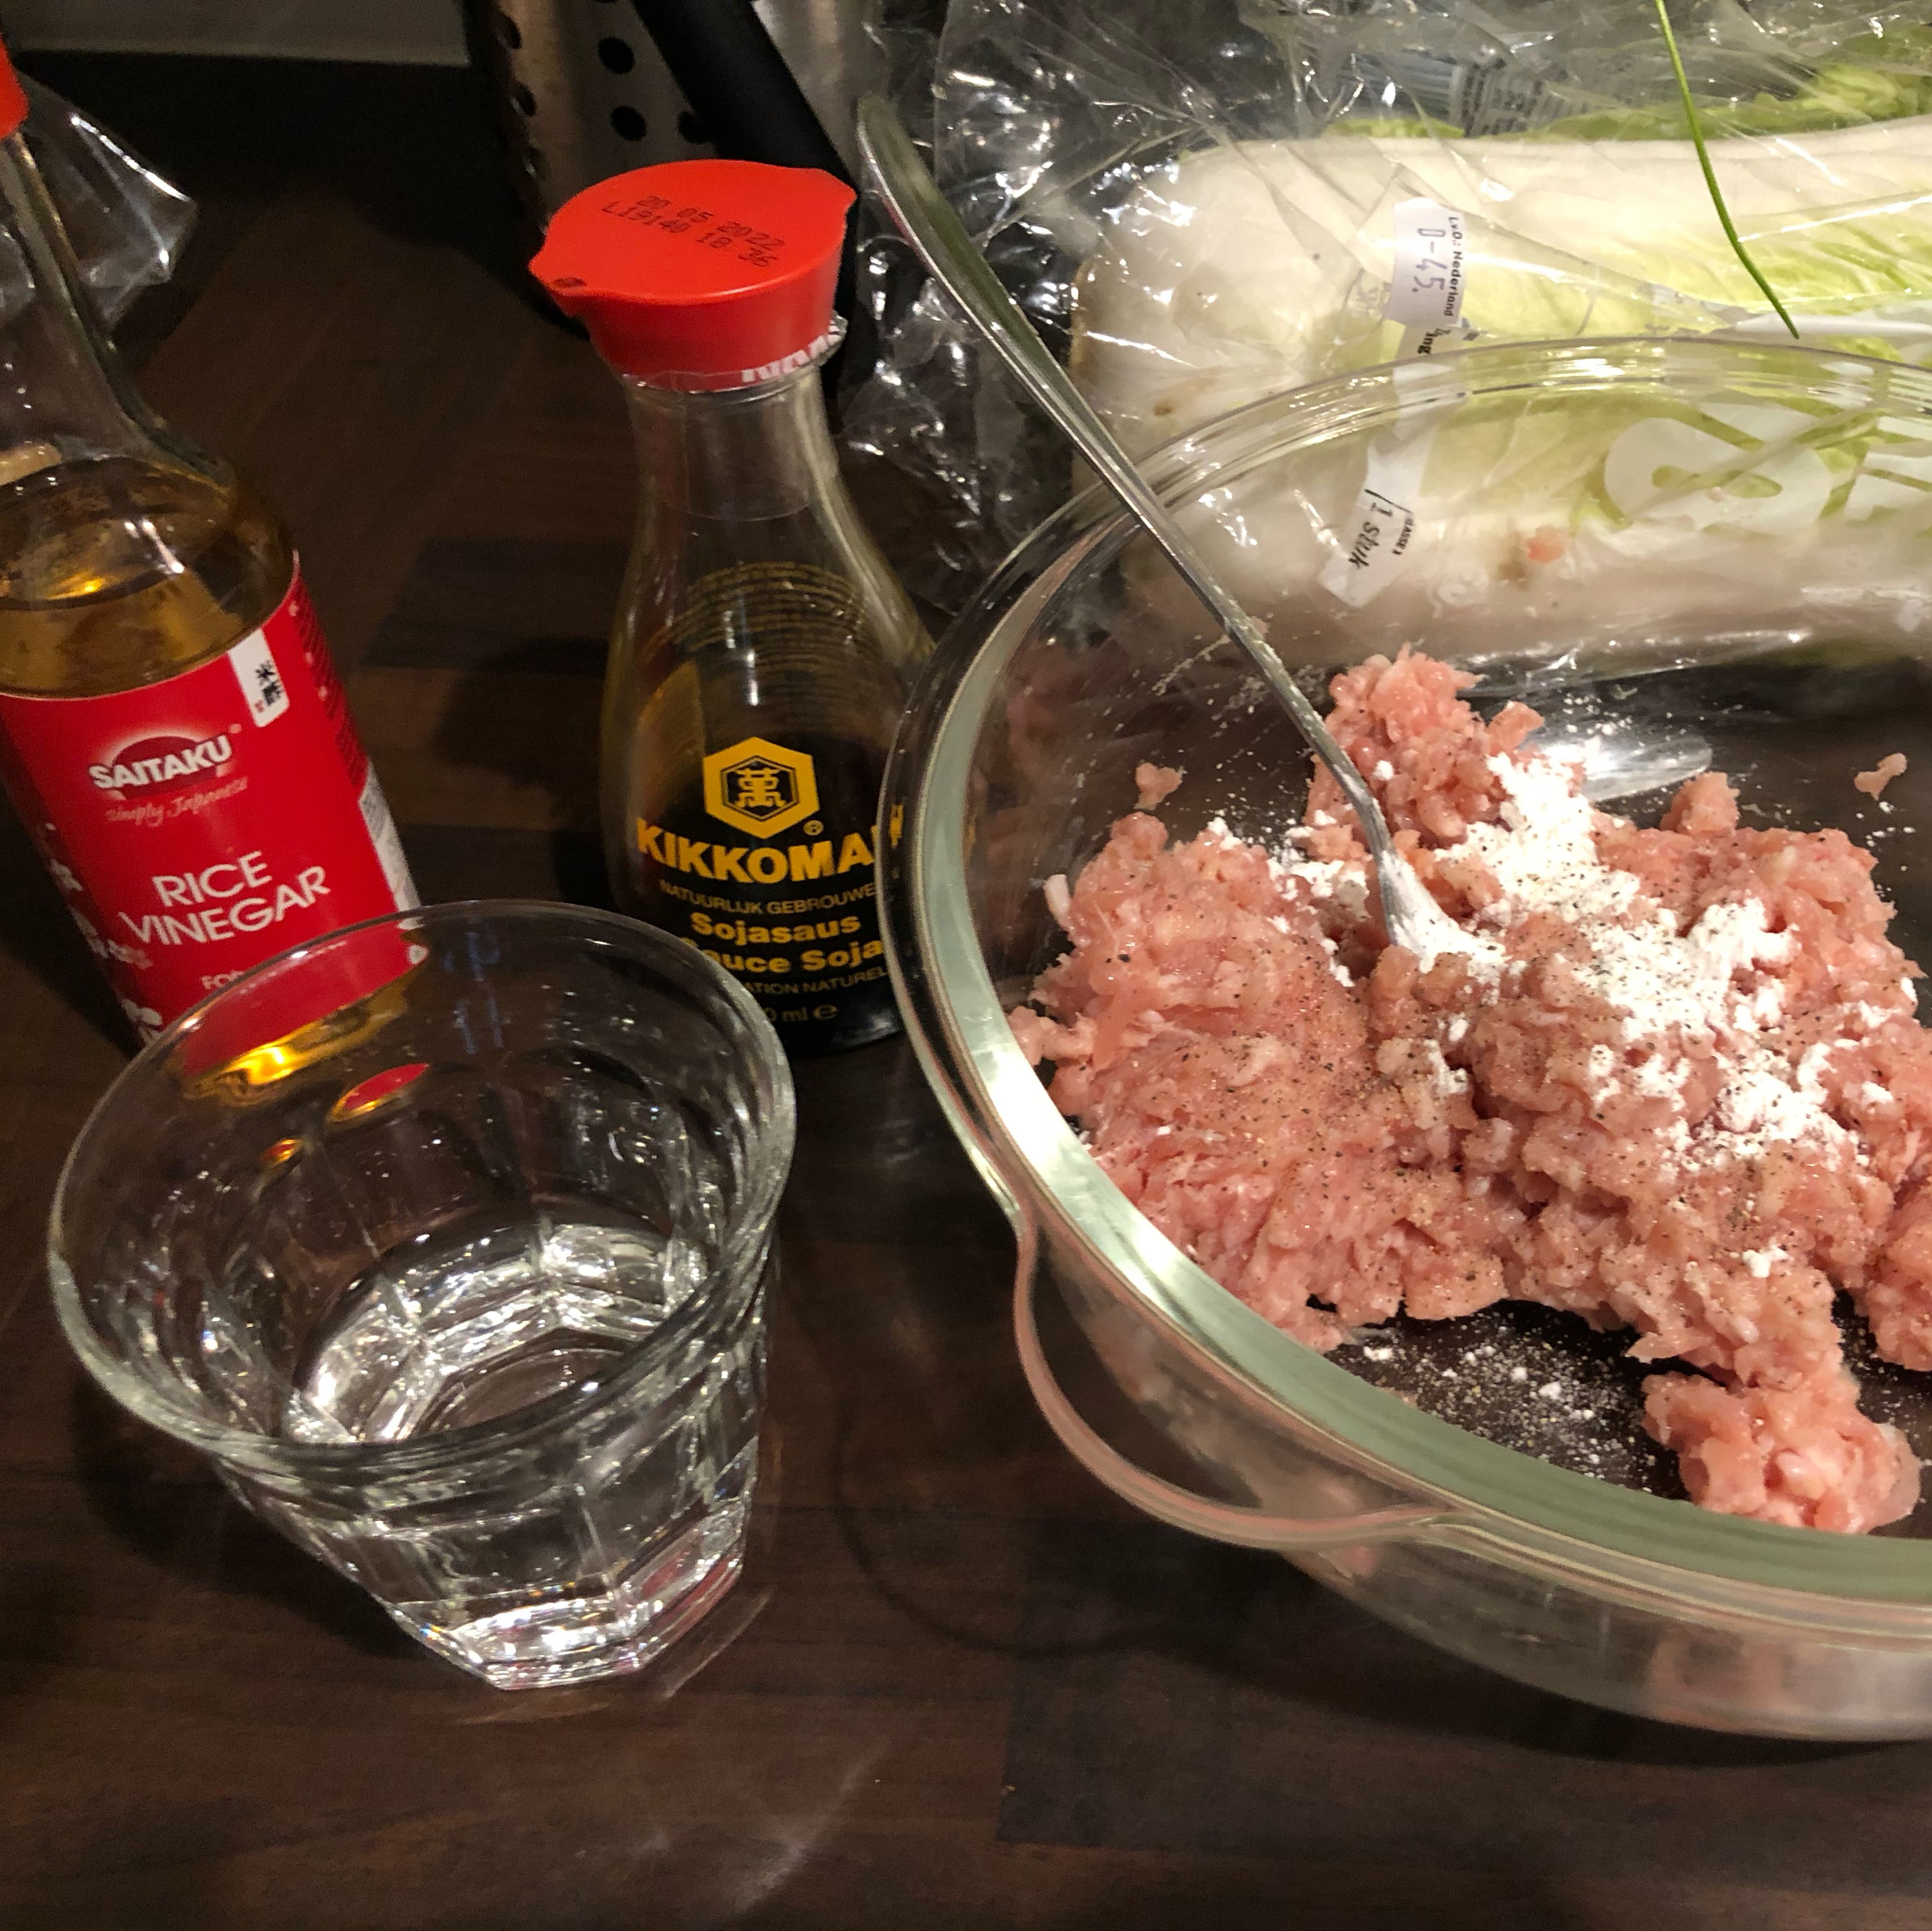 Put the ground chicken in bowl. Combine with the sugar, sesame oil, water, rice wine vinegar, soy sauce and corn flower. Season with salt and pepper.